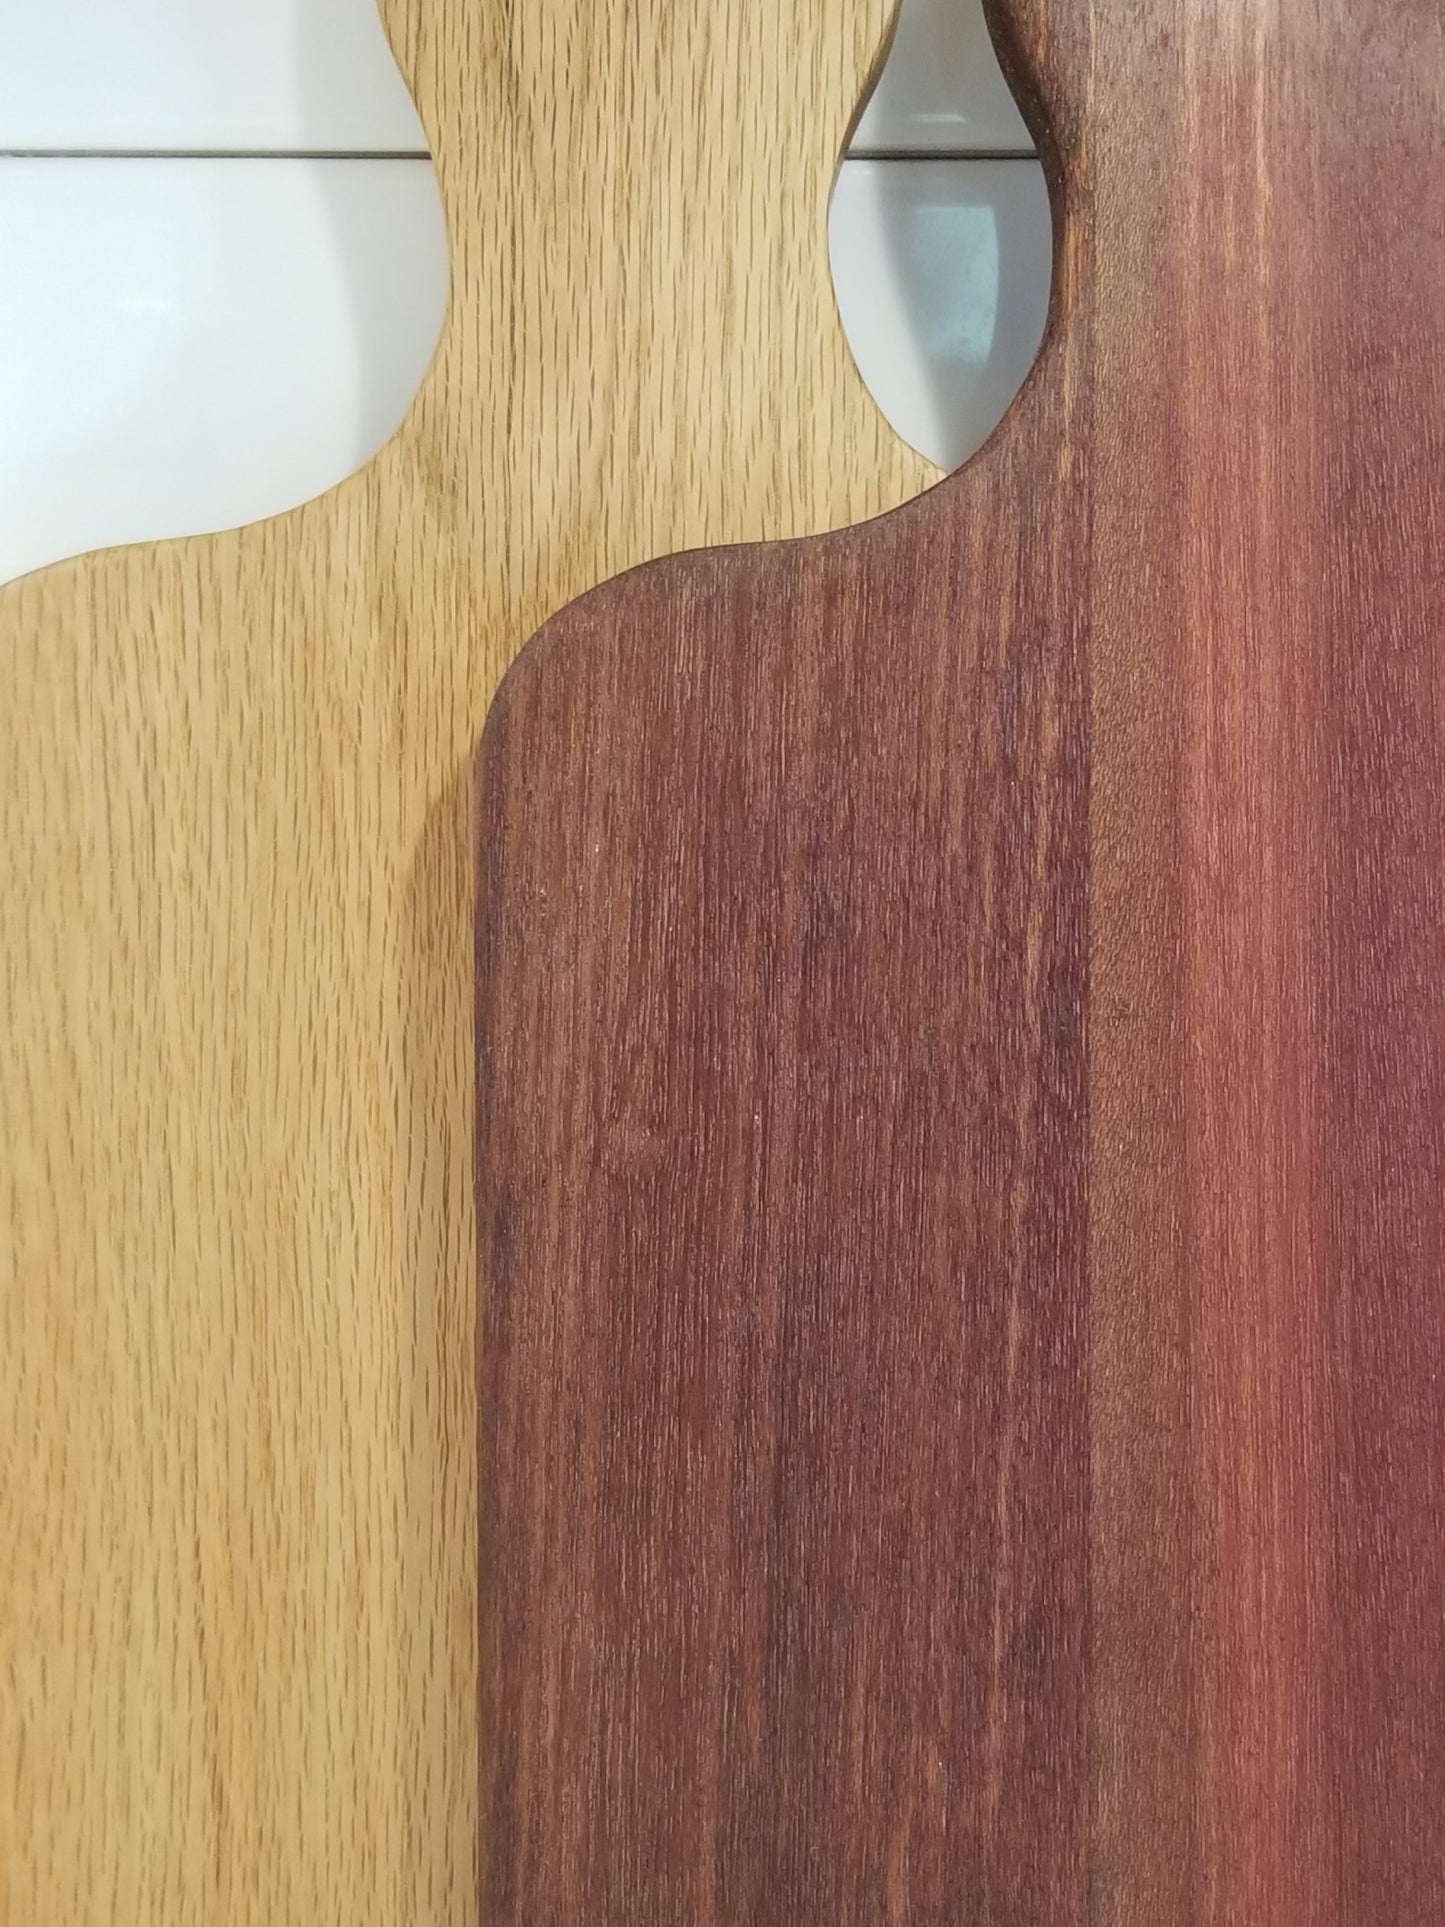 Wood bread cutting boards with different finishes